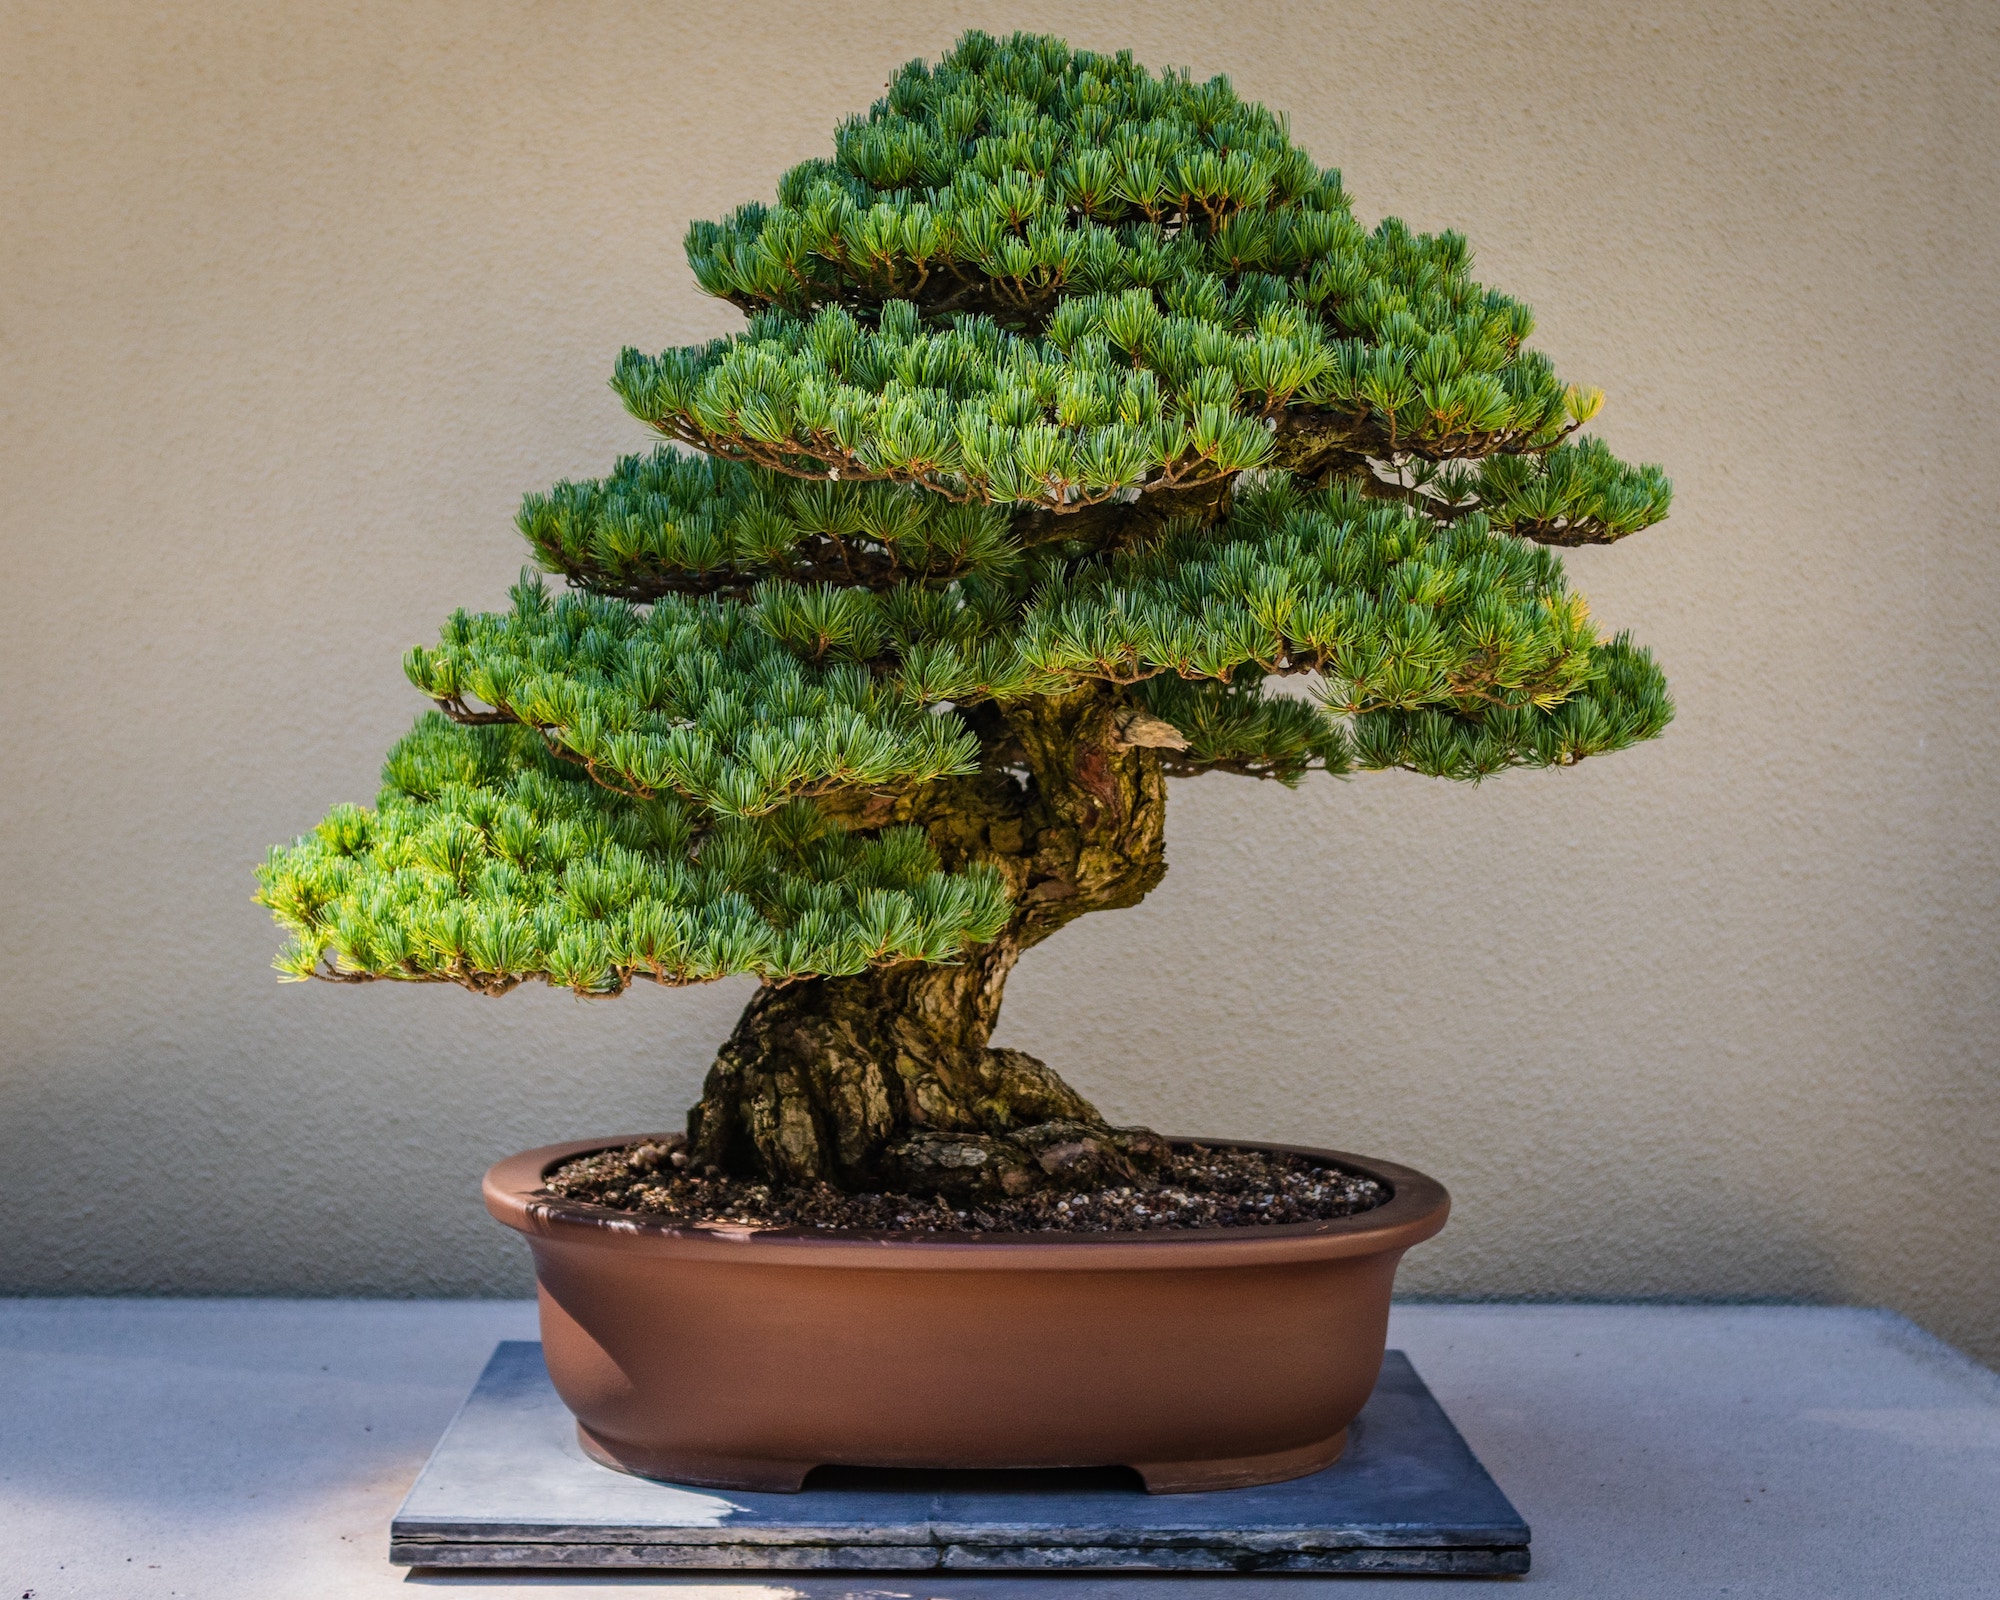 Wonderinterest | Investing in plants: would you buy a bonsai for a million? Sorry, it's already sold!